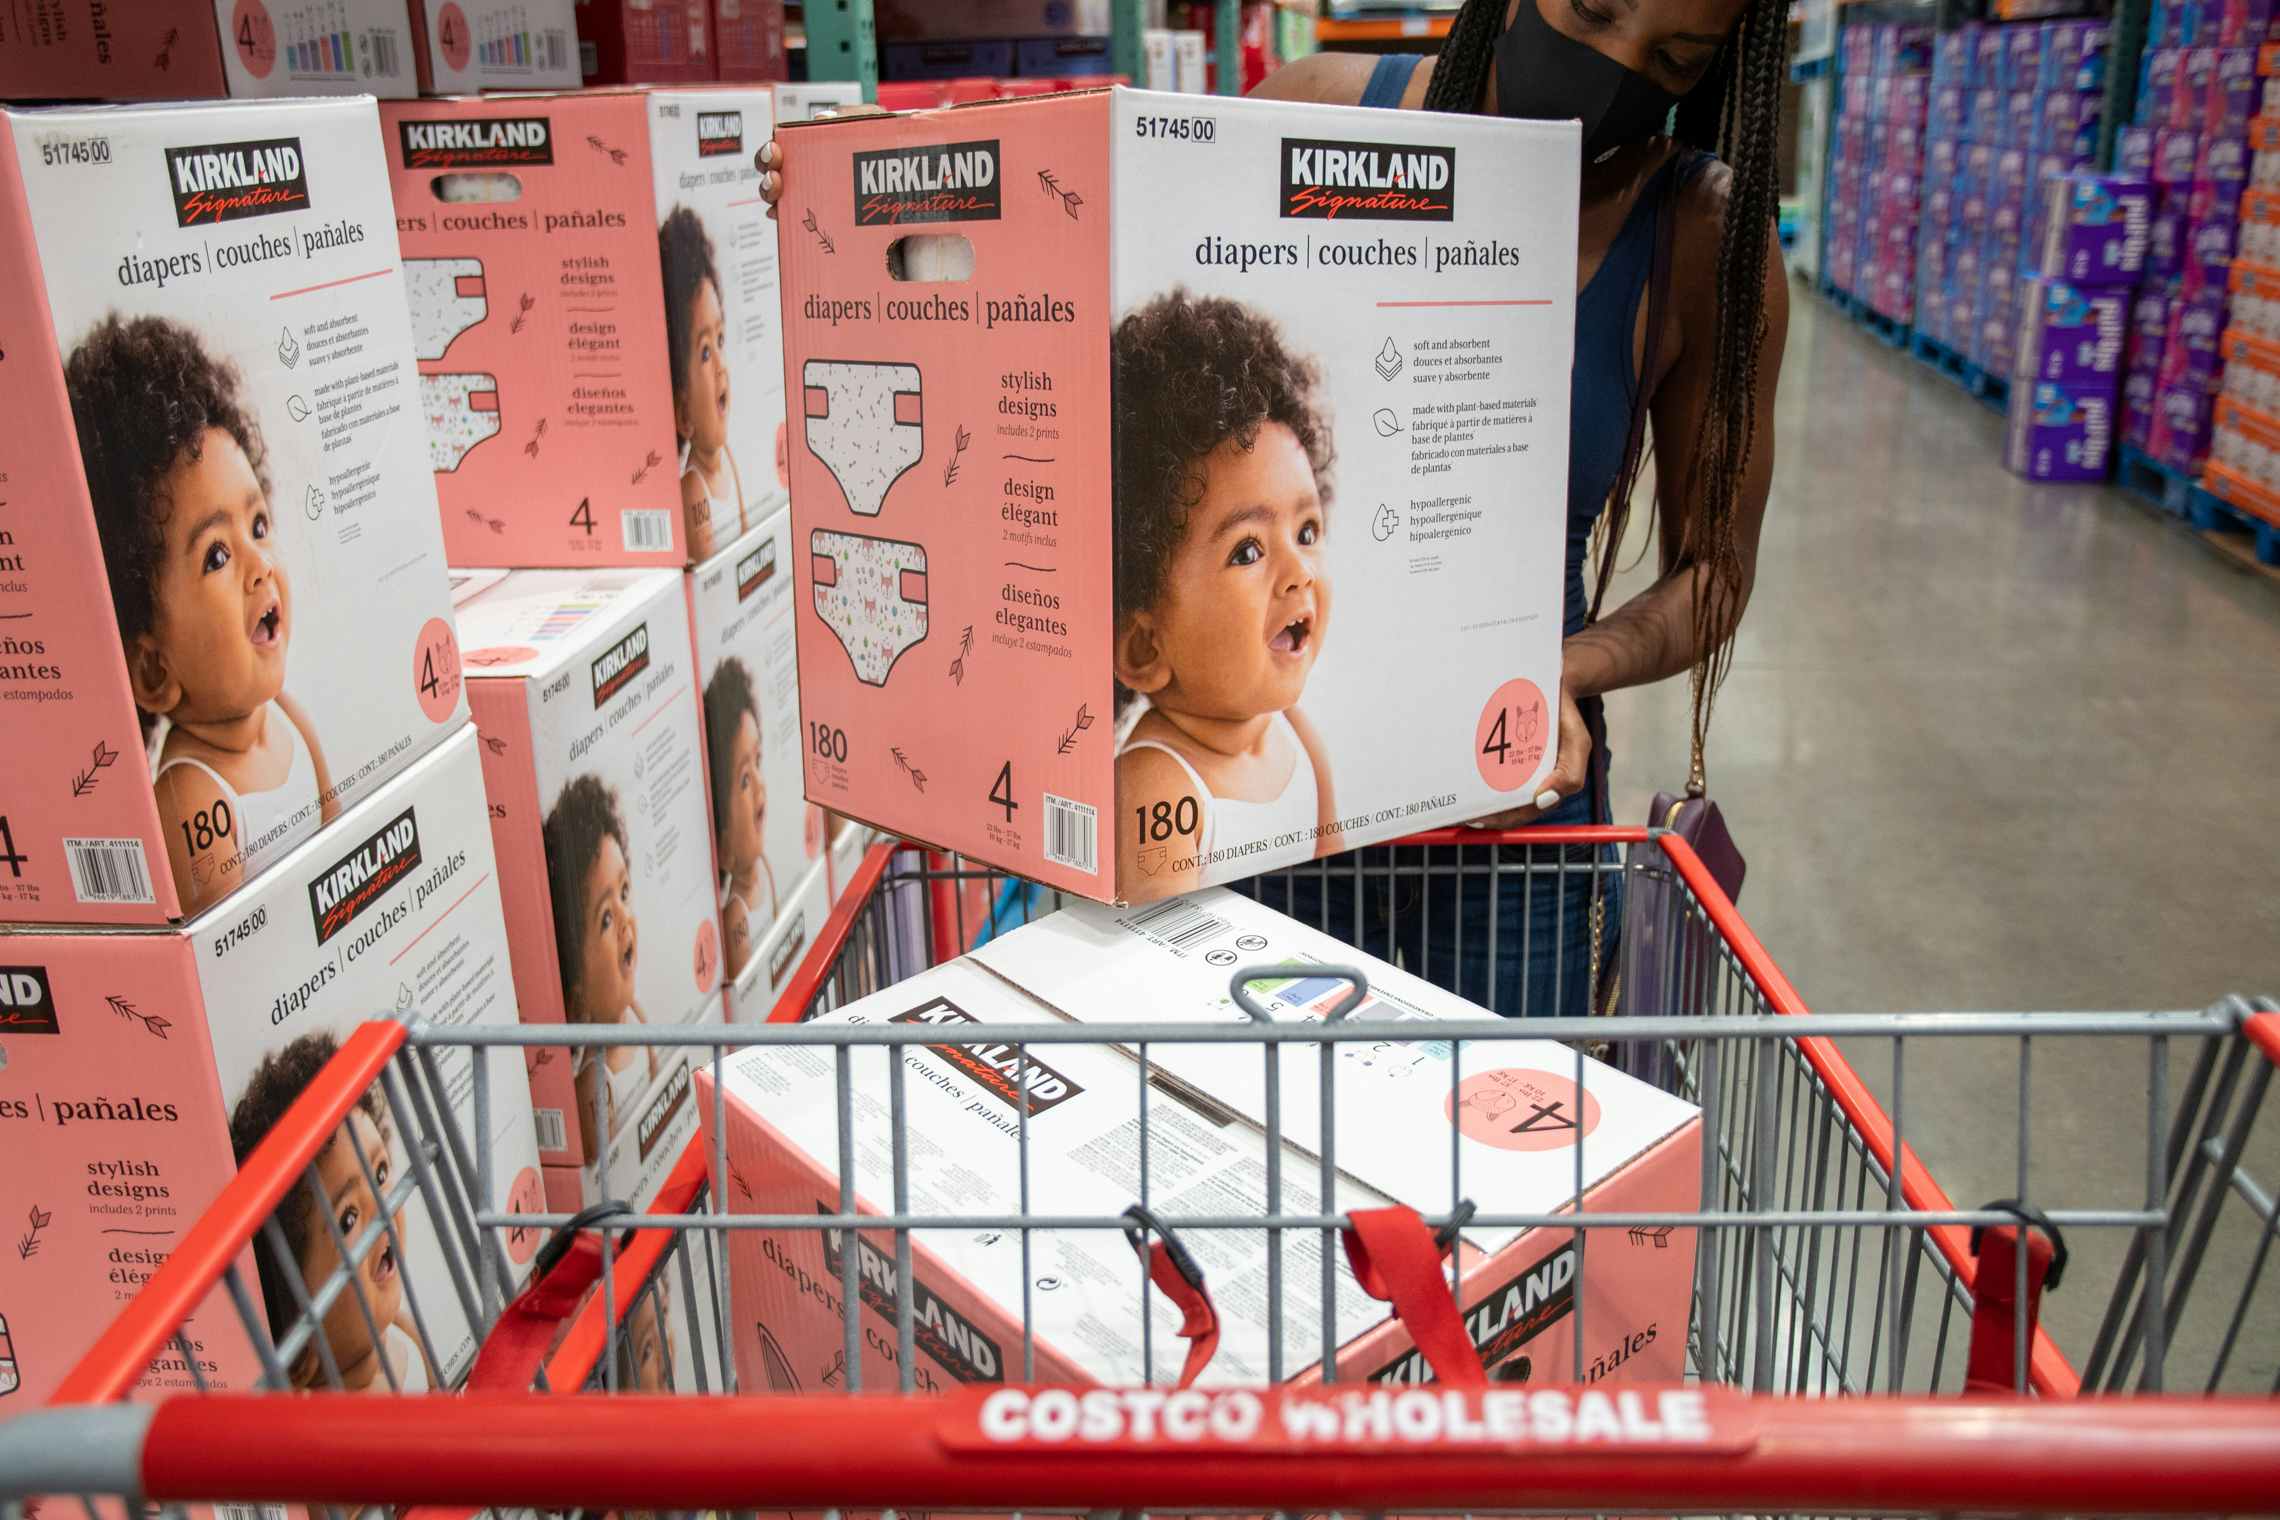 A woman shopping for Kirkland diapers inside Costco.